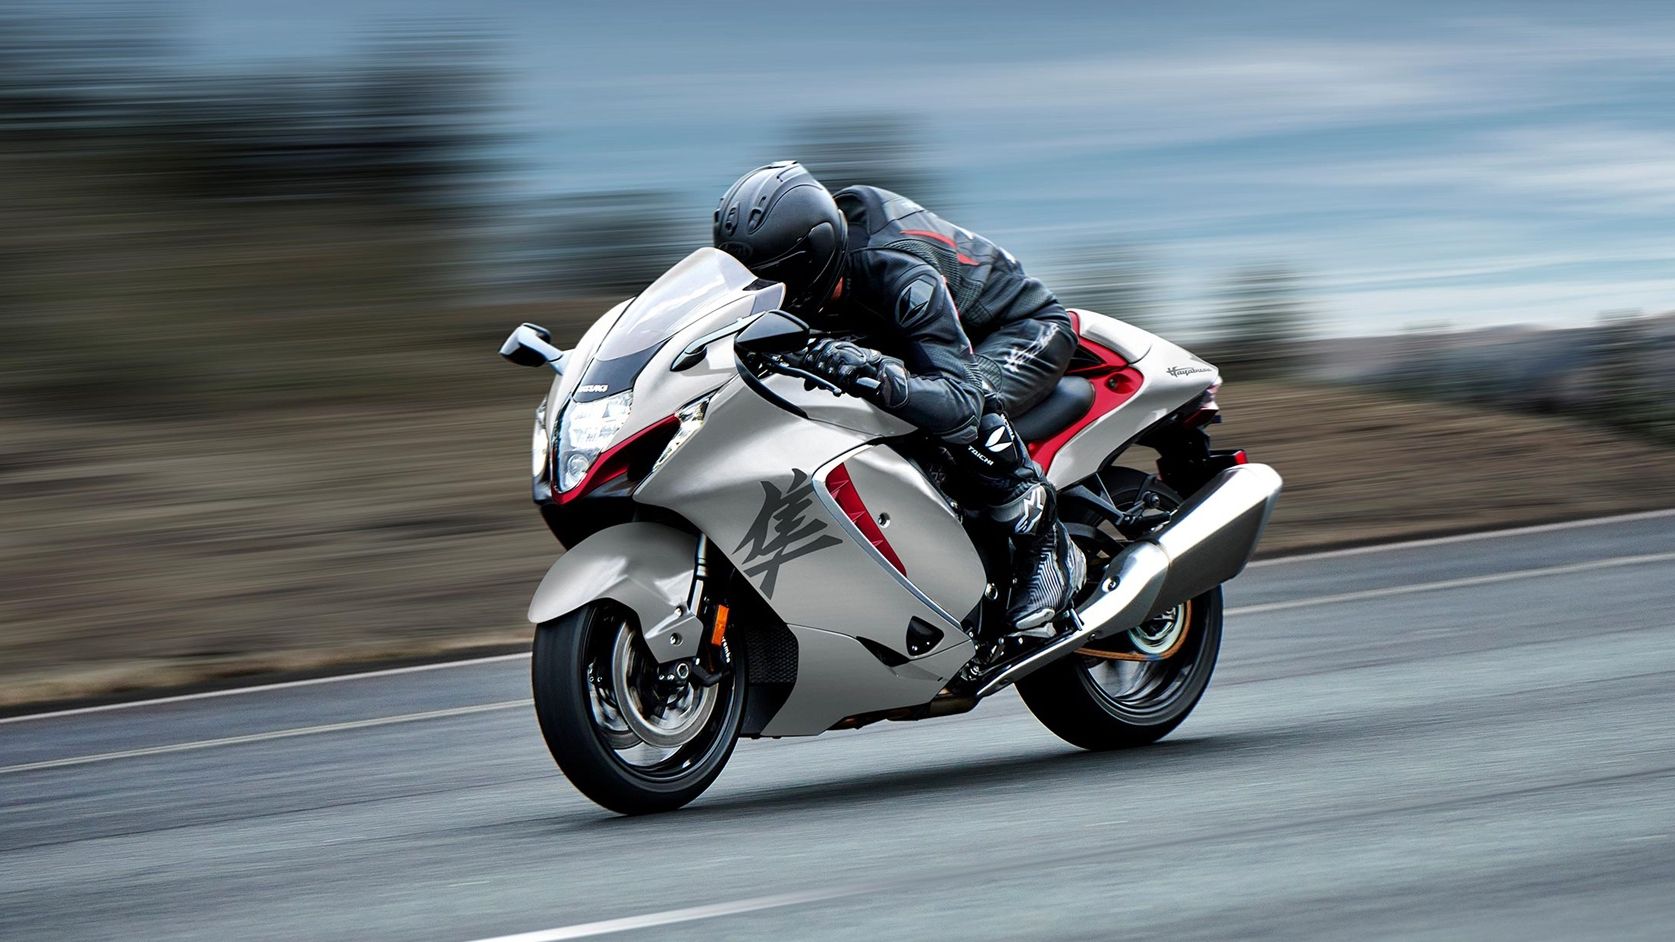 An action shot of a 2023 Suzuki Hayabusa riding on the road